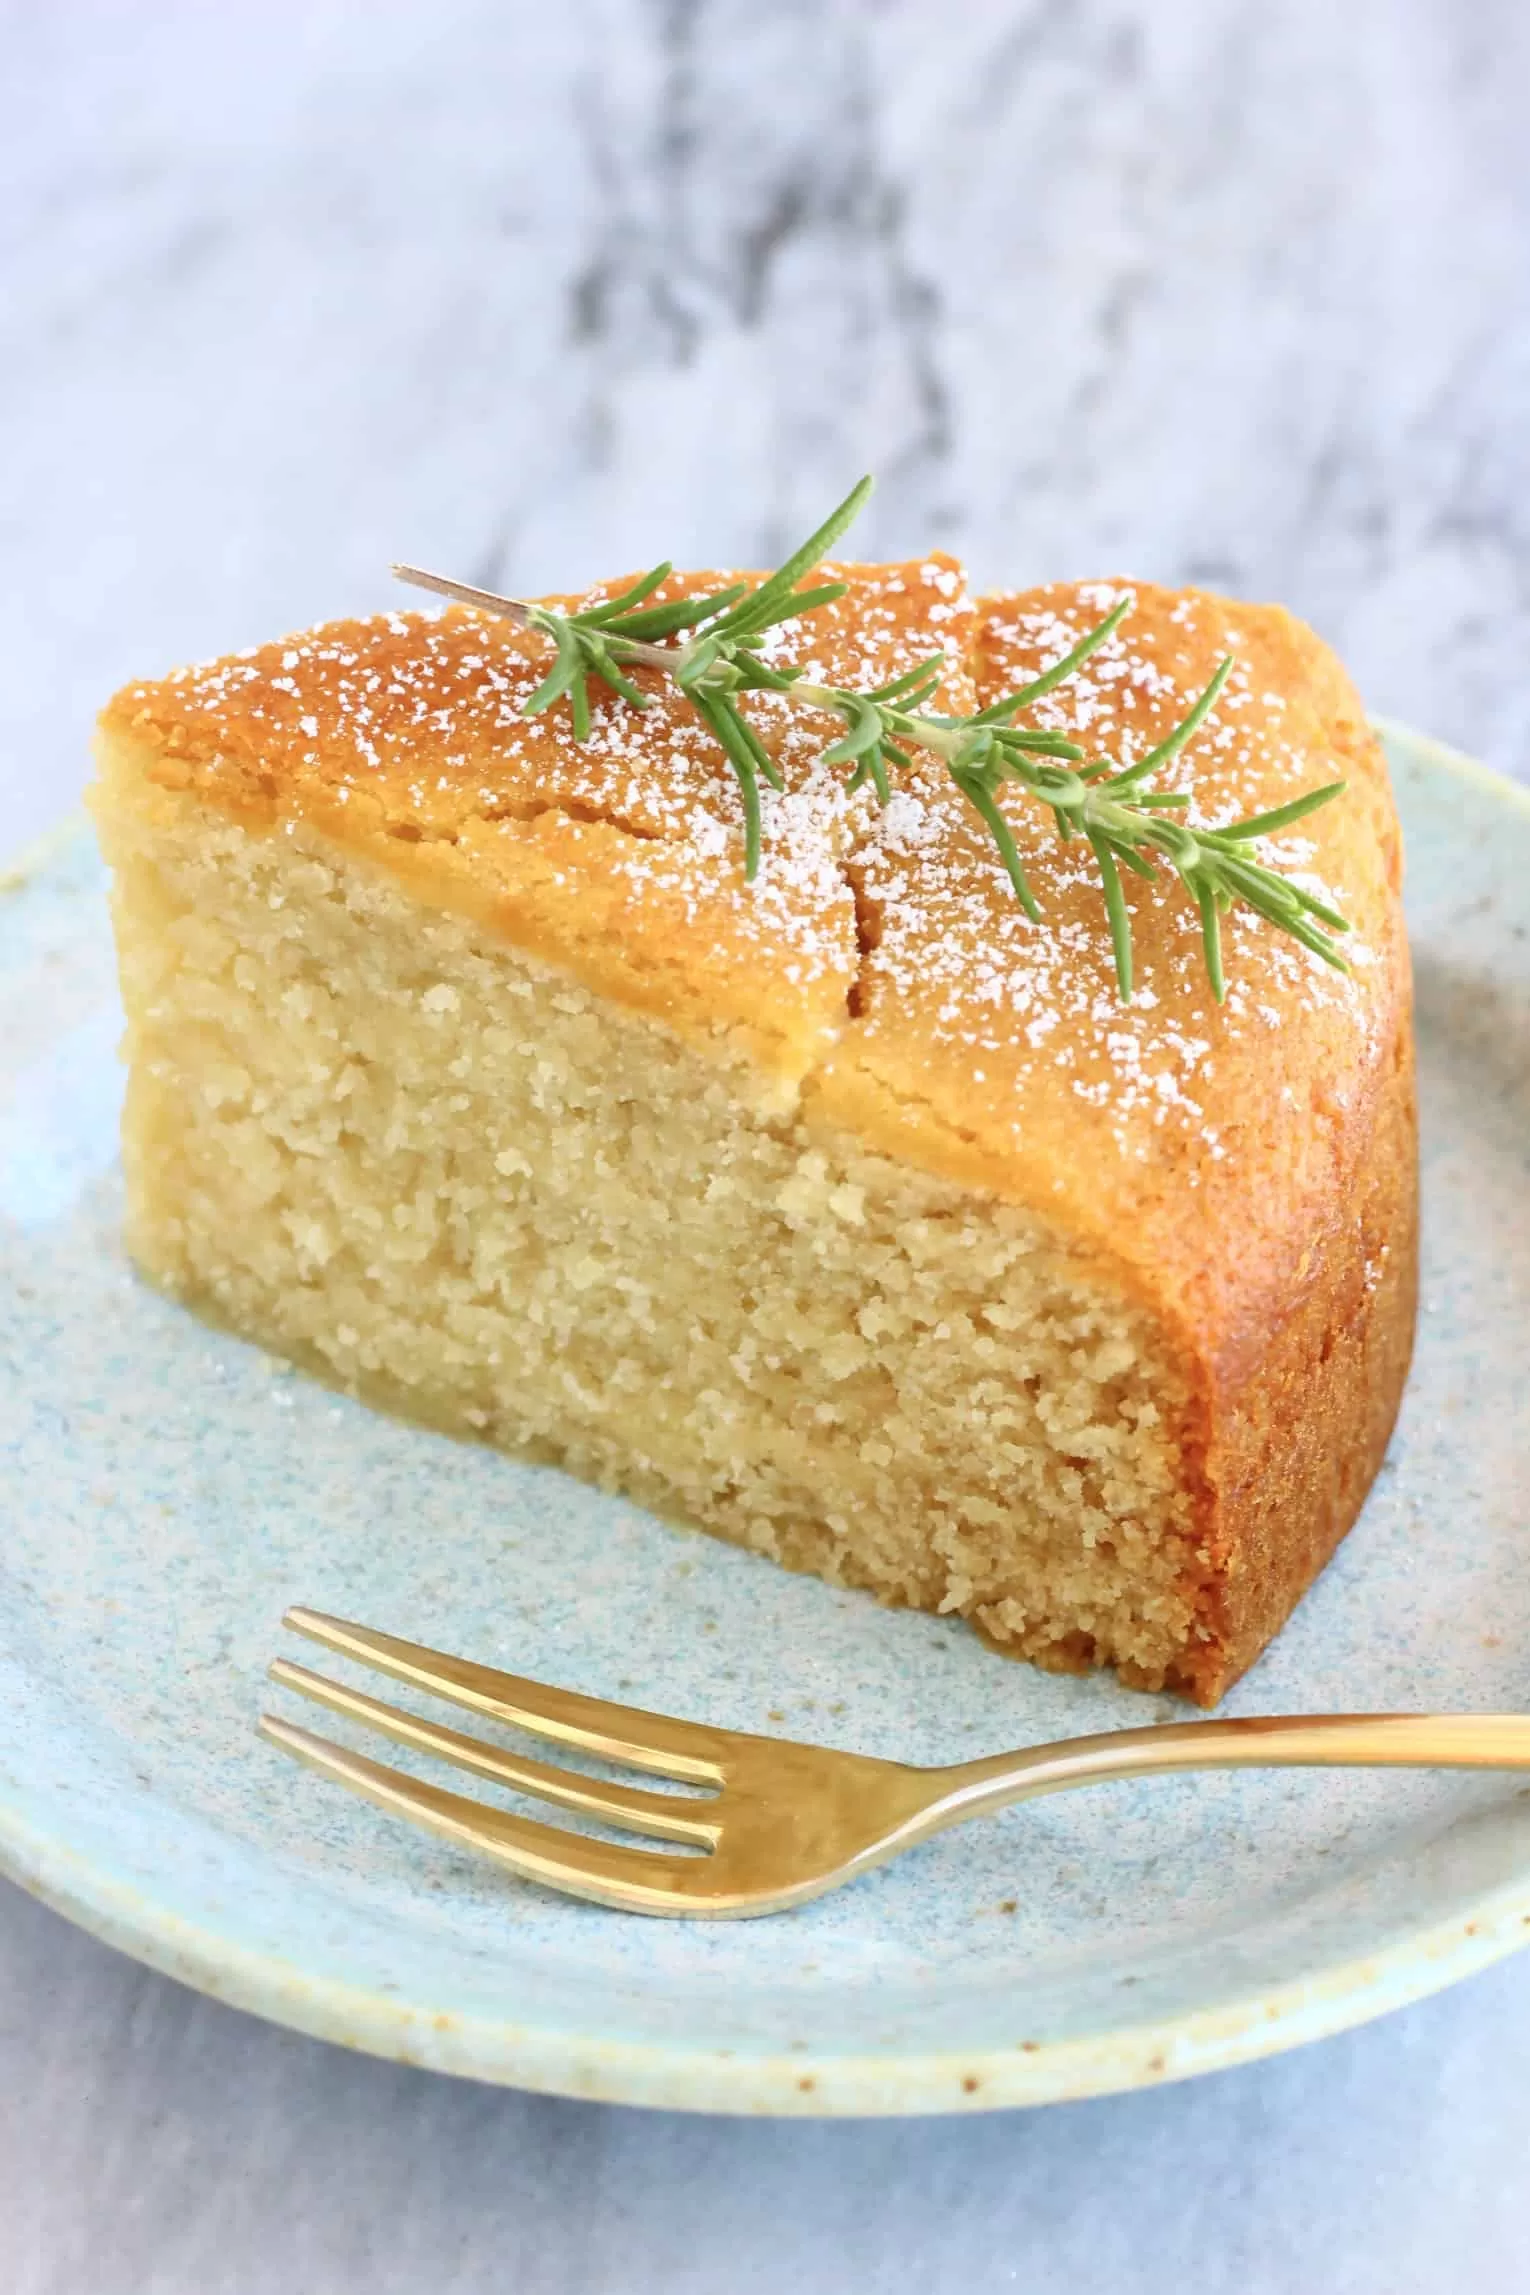 A slice of gluten-free vegan olive oil cake decorated with rosemary on a plate with a fork